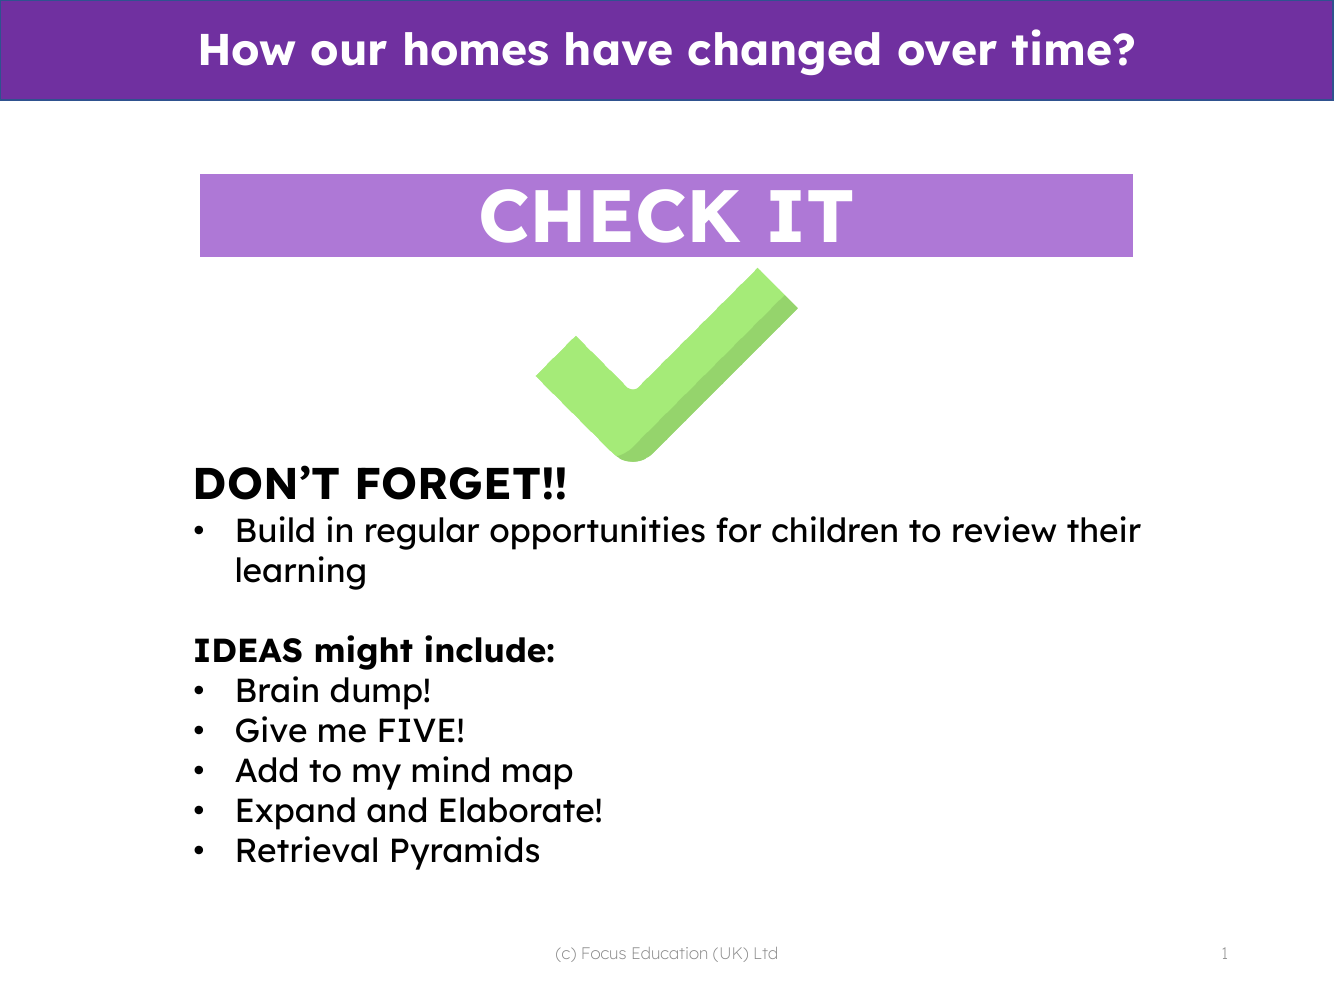 Check it! - Homes over time - 2nd Grade